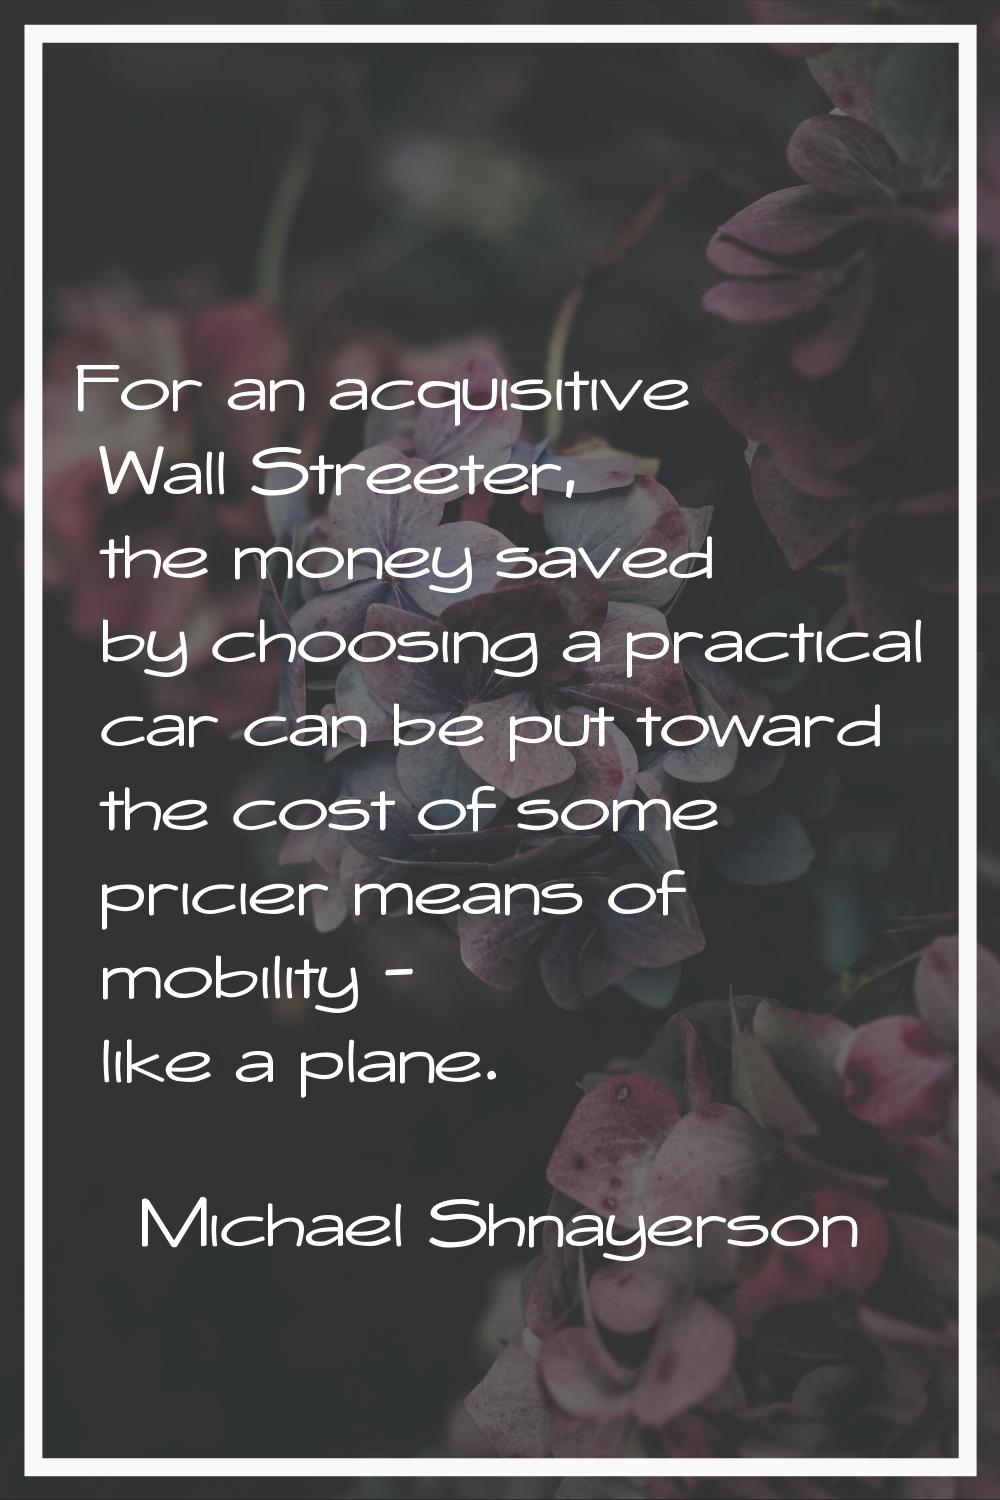 For an acquisitive Wall Streeter, the money saved by choosing a practical car can be put toward the